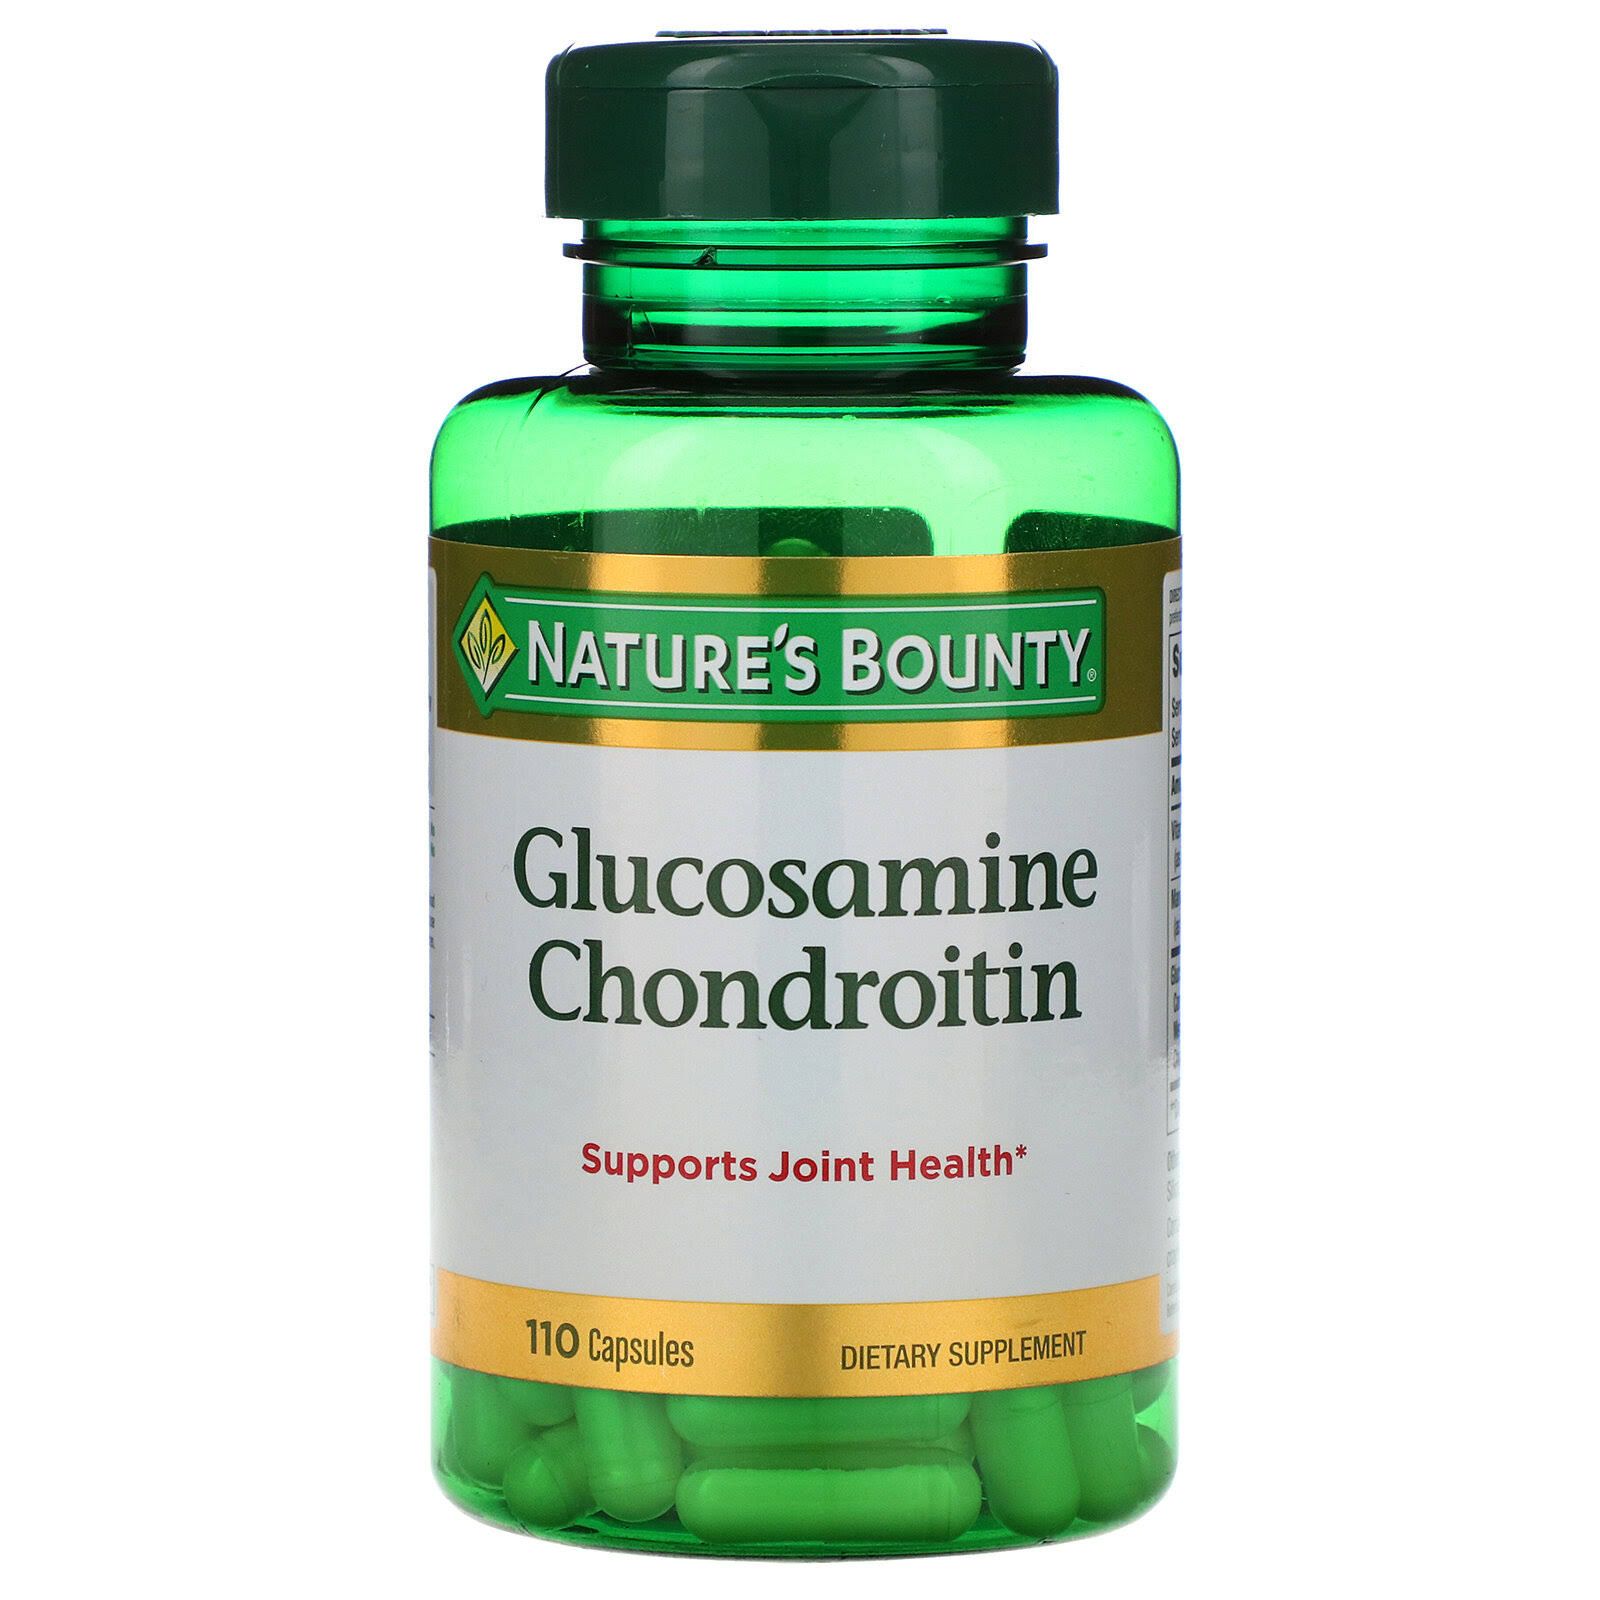 Nature's Bounty Glucosamine Chondroitin Complex Dietary Supplement - 110ct